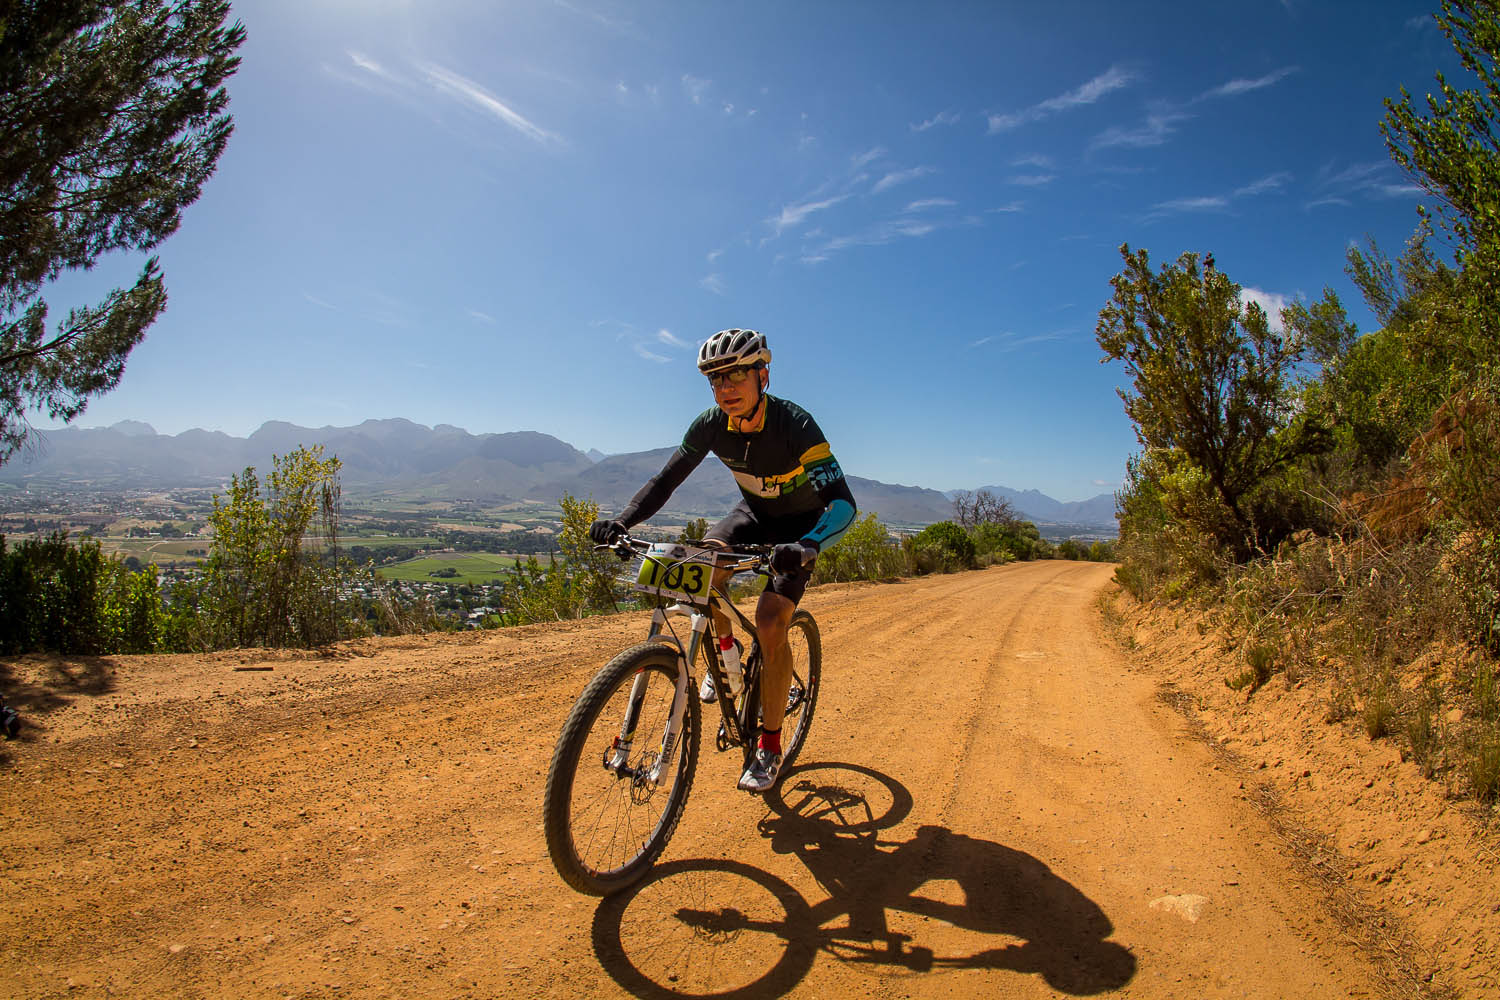 Perfect conditions helped Rikus Visser secure the win at the Bestmed Paarl MTB Classic, presented by the City of Drakenstein and ASG, at the Rhebokskloof Wine Estate on Sunday. Photo: Warren Elsom | Capcha Photo